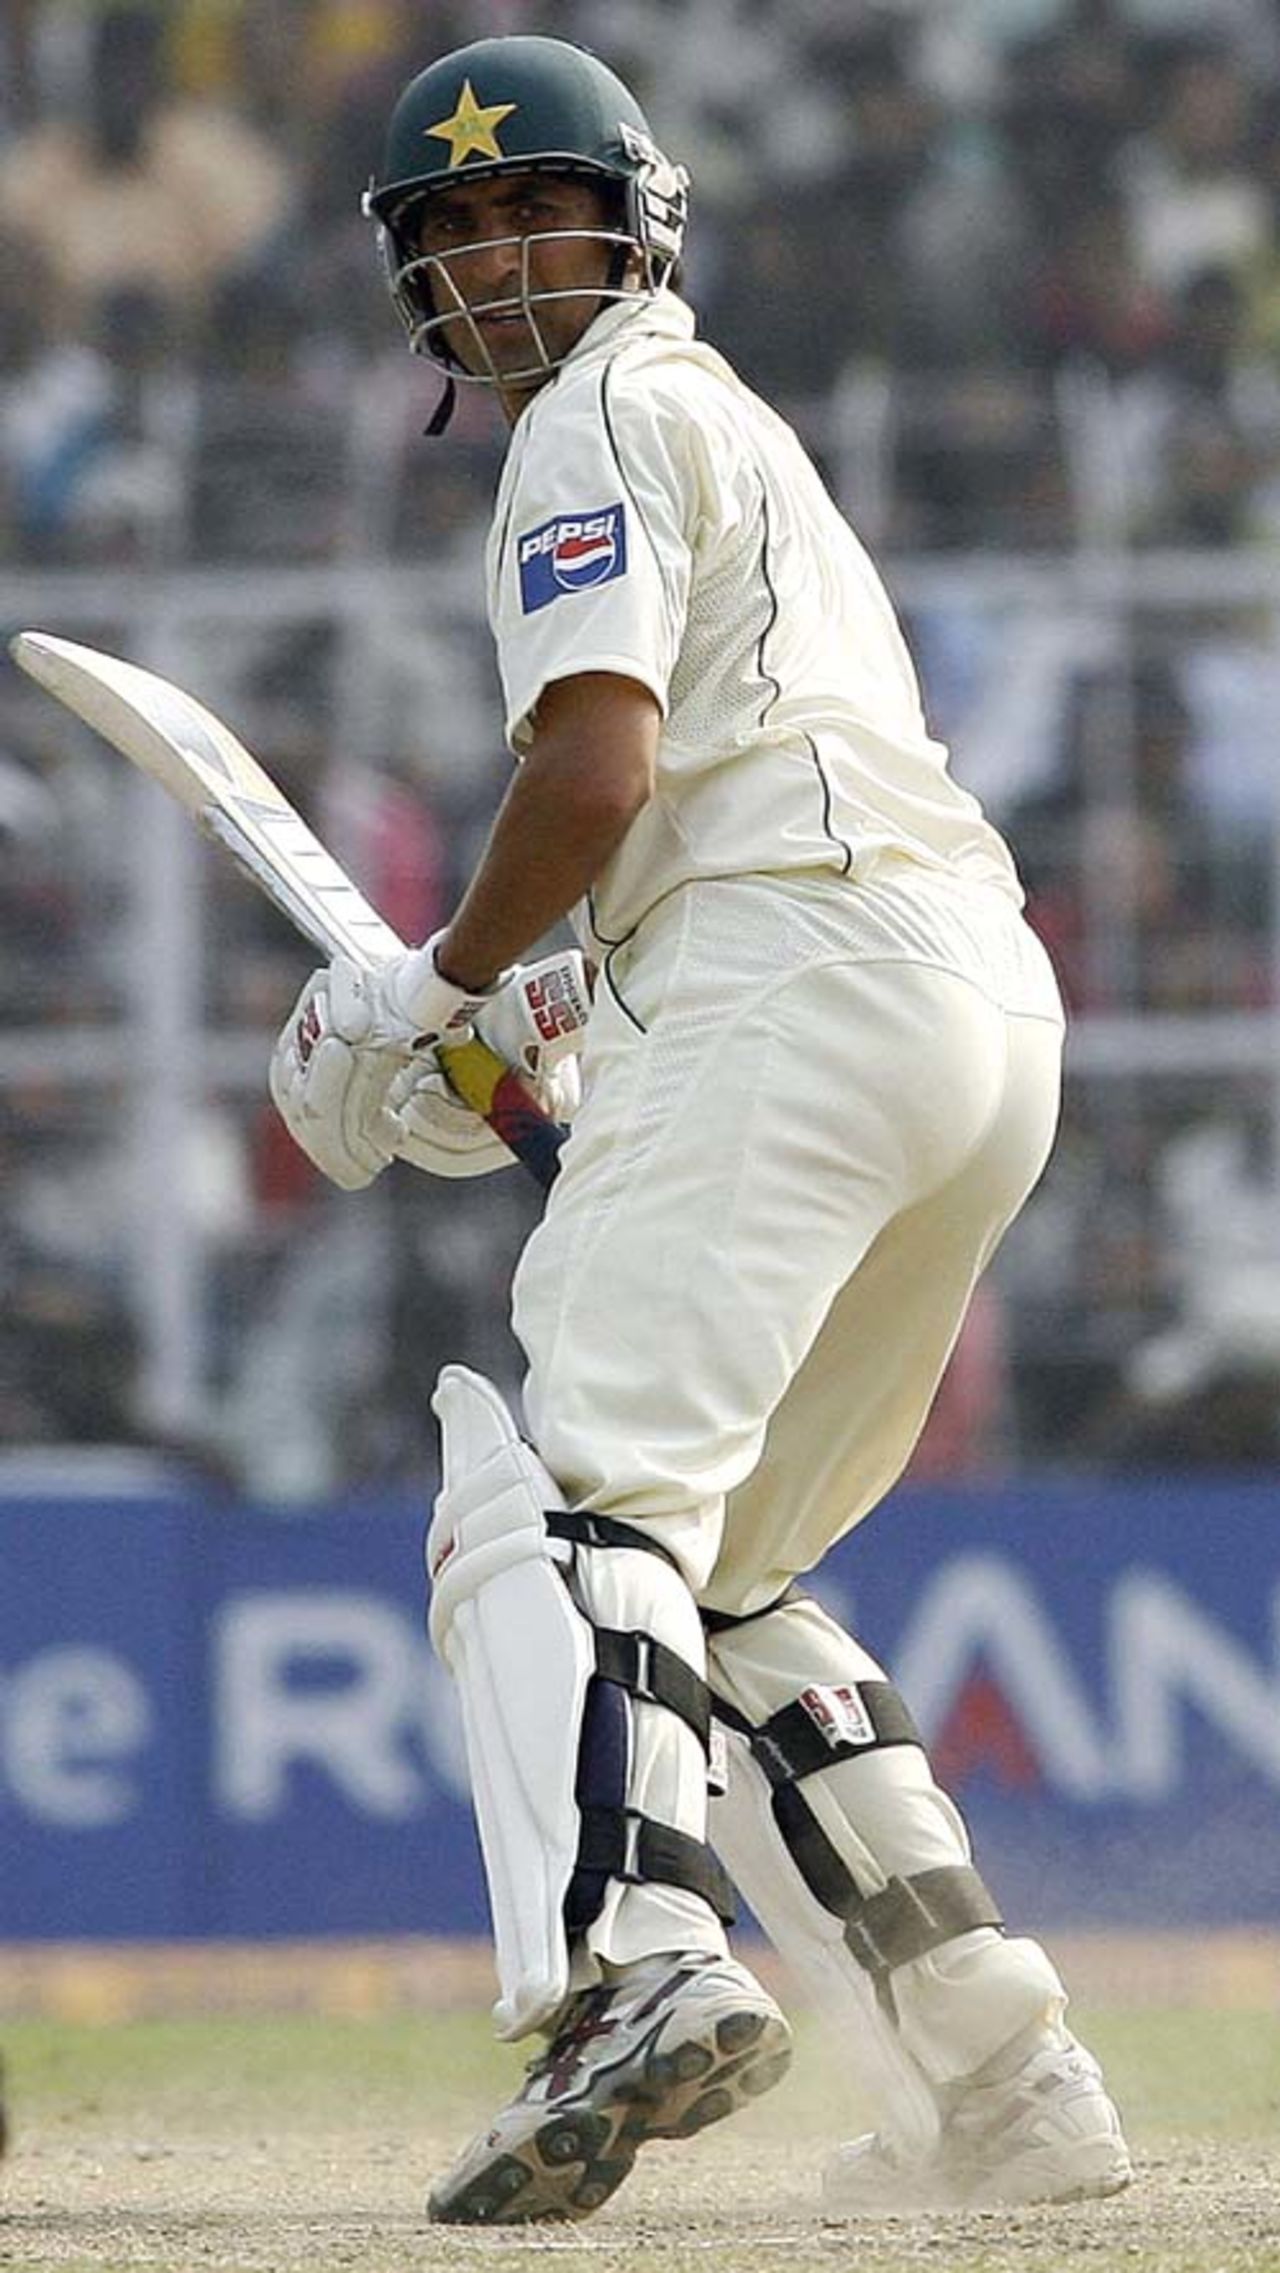 Younis Khan guides one fine, India v Pakistan, 2nd Test, Kolkata, 5th day, December 4, 2007